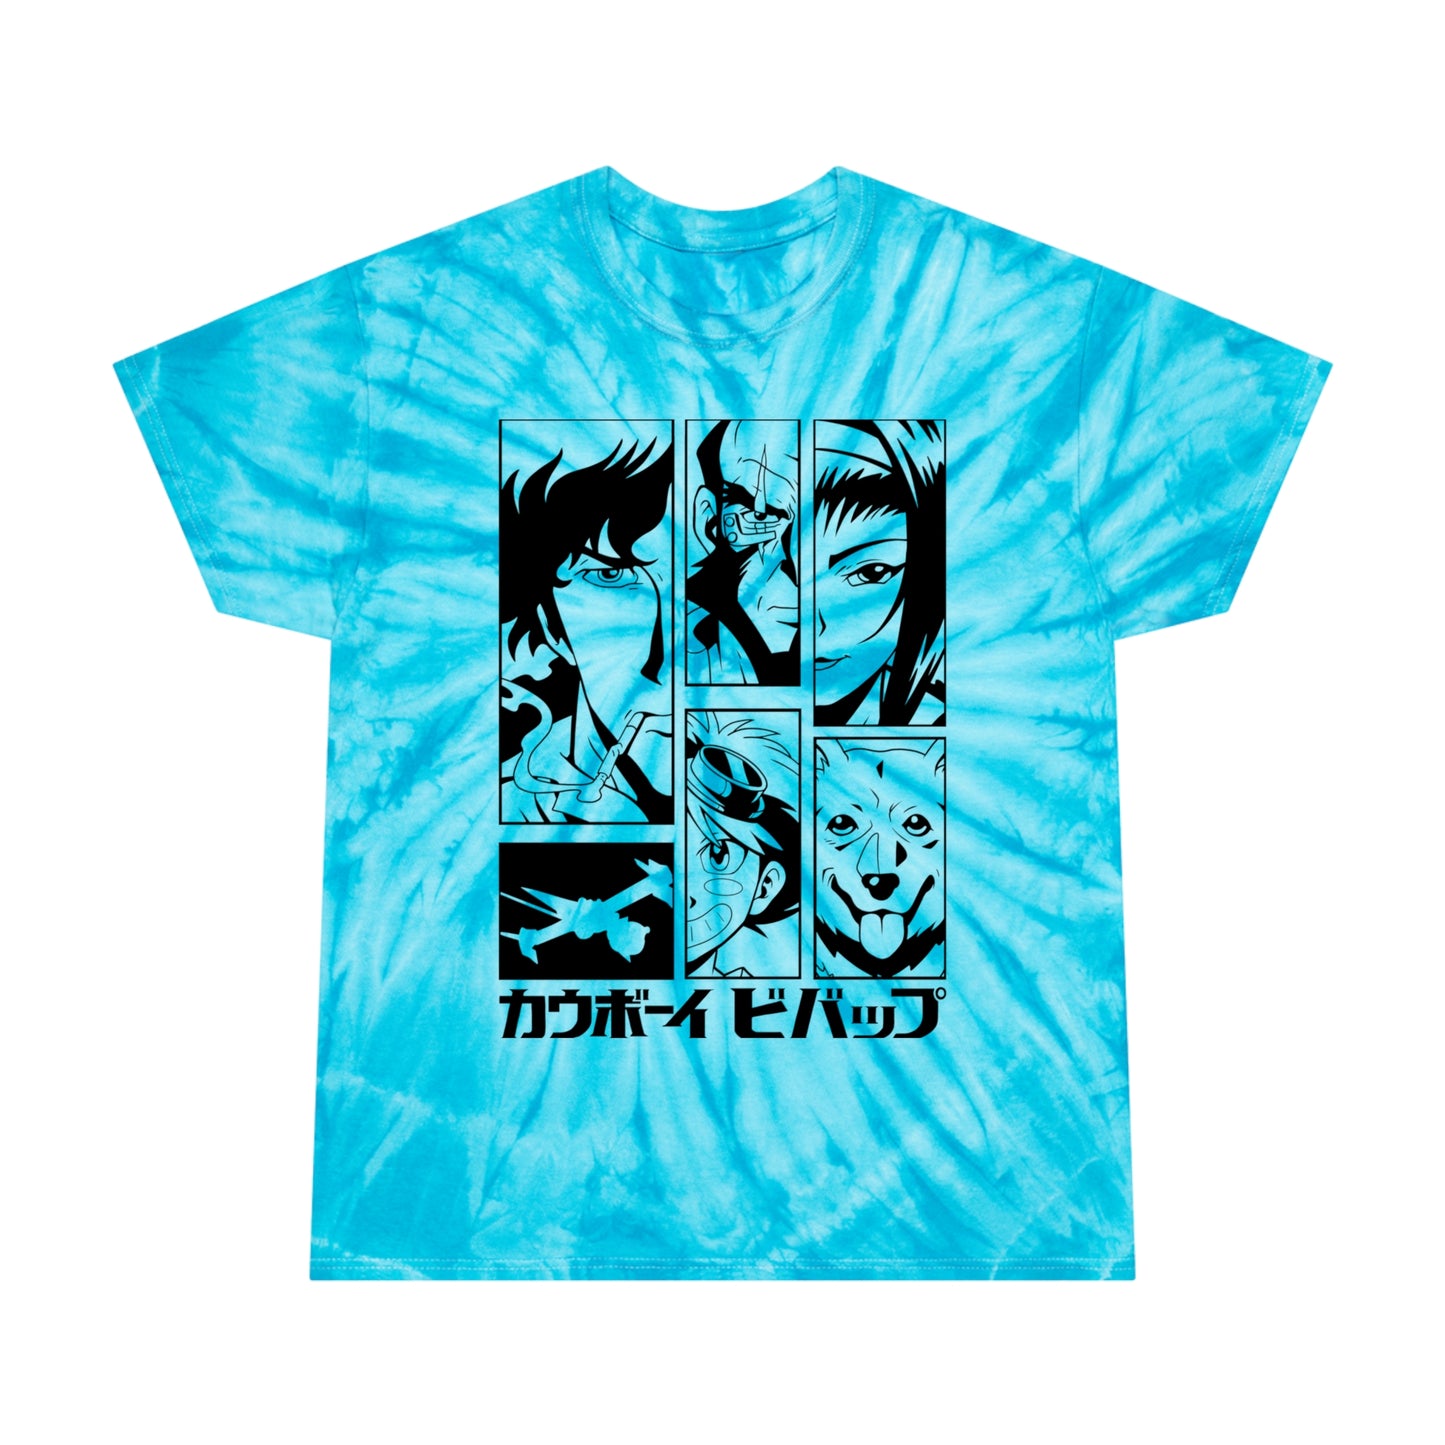 See You Space Cowboys tie-dye t-shirt